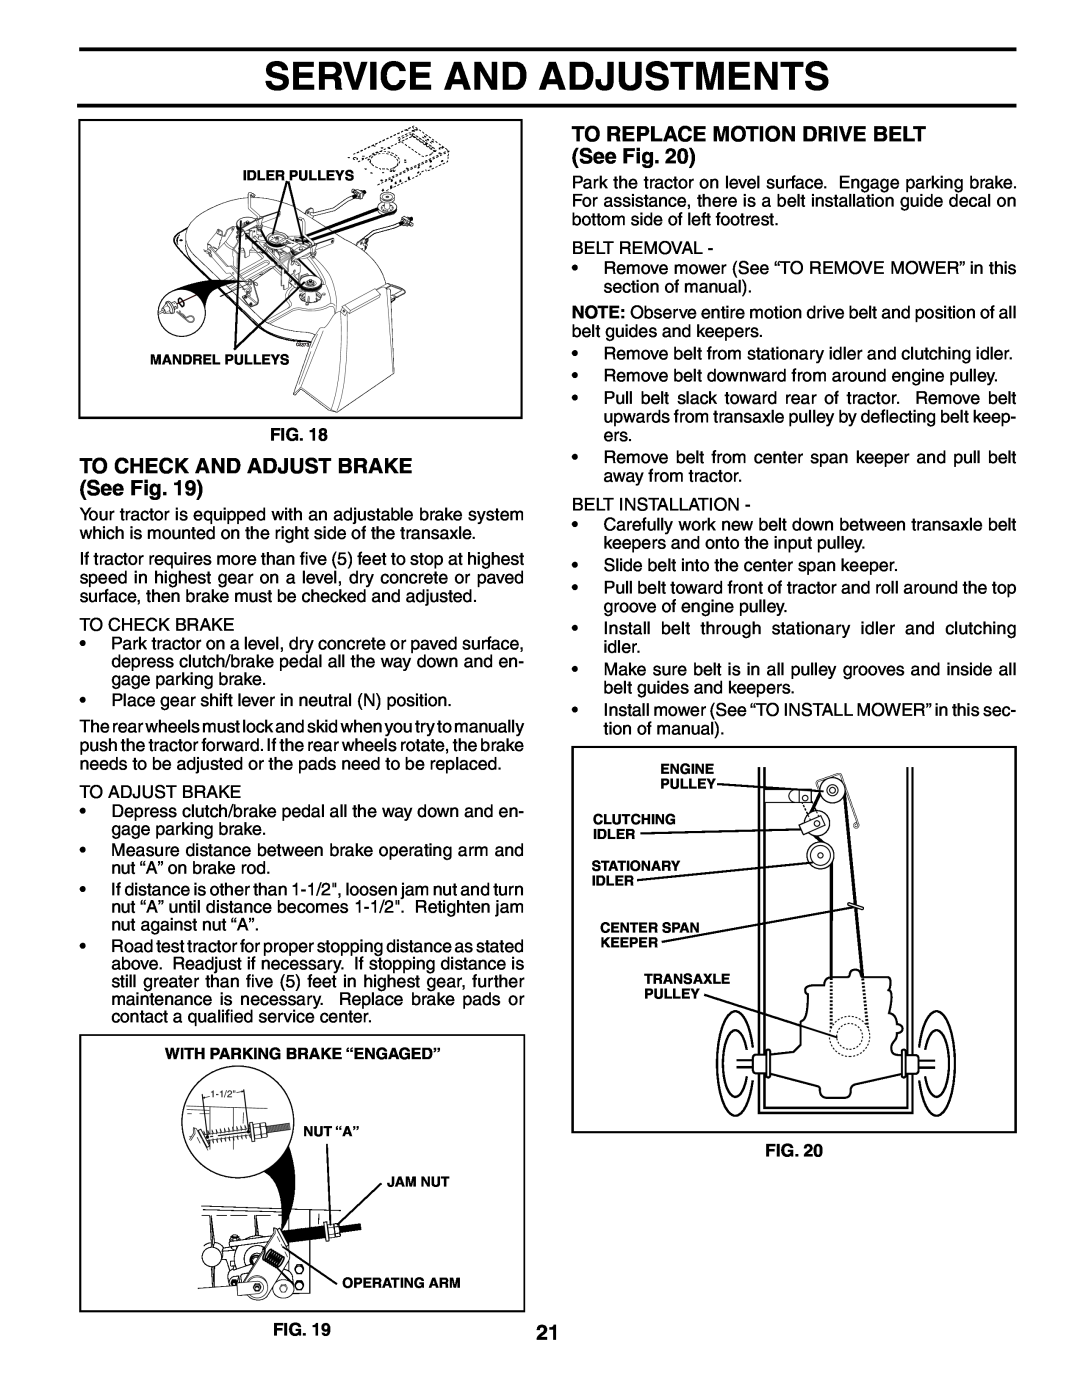 Weed Eater 195383 manual TO CHECK AND ADJUST BRAKE See Fig, TO REPLACE MOTION DRIVE BELT See Fig, Service And Adjustments 